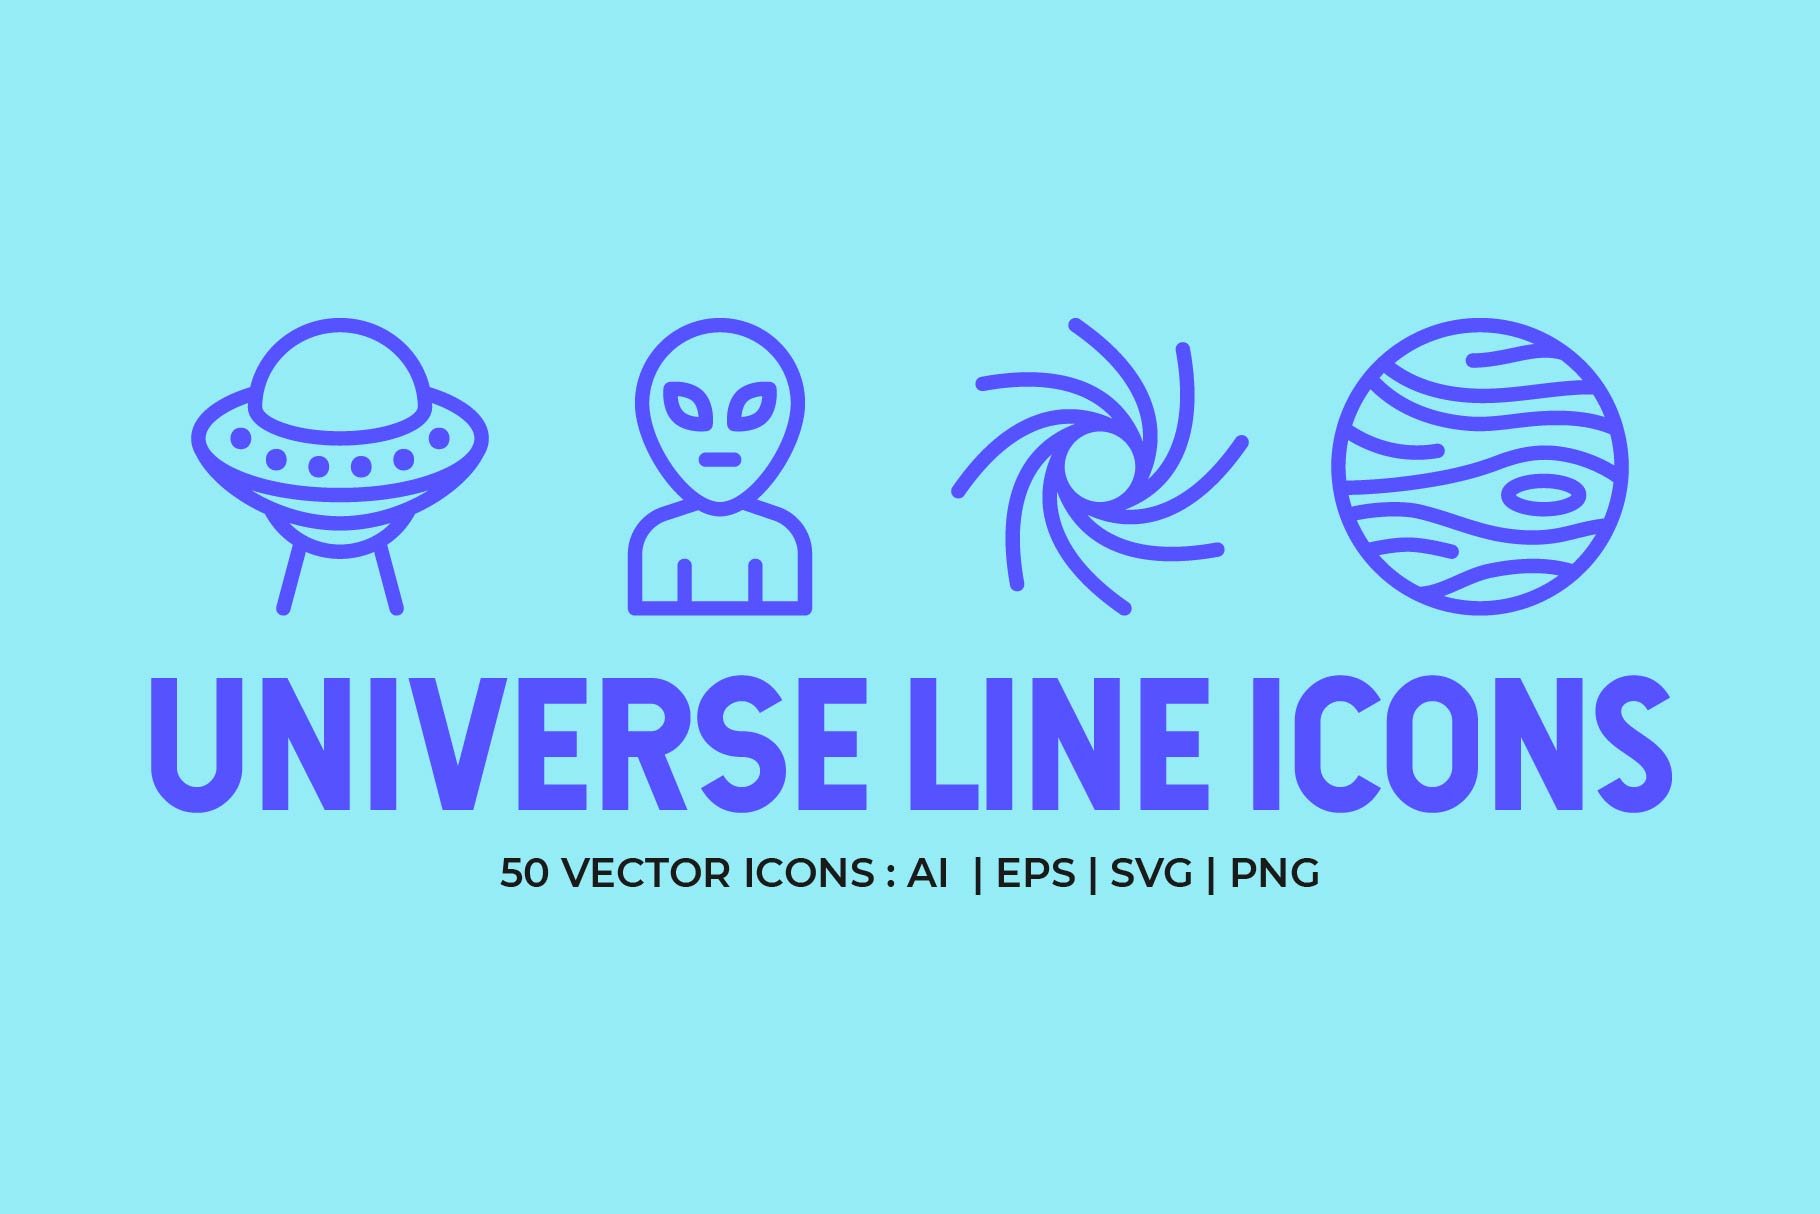 Universe Line Icons cover image.